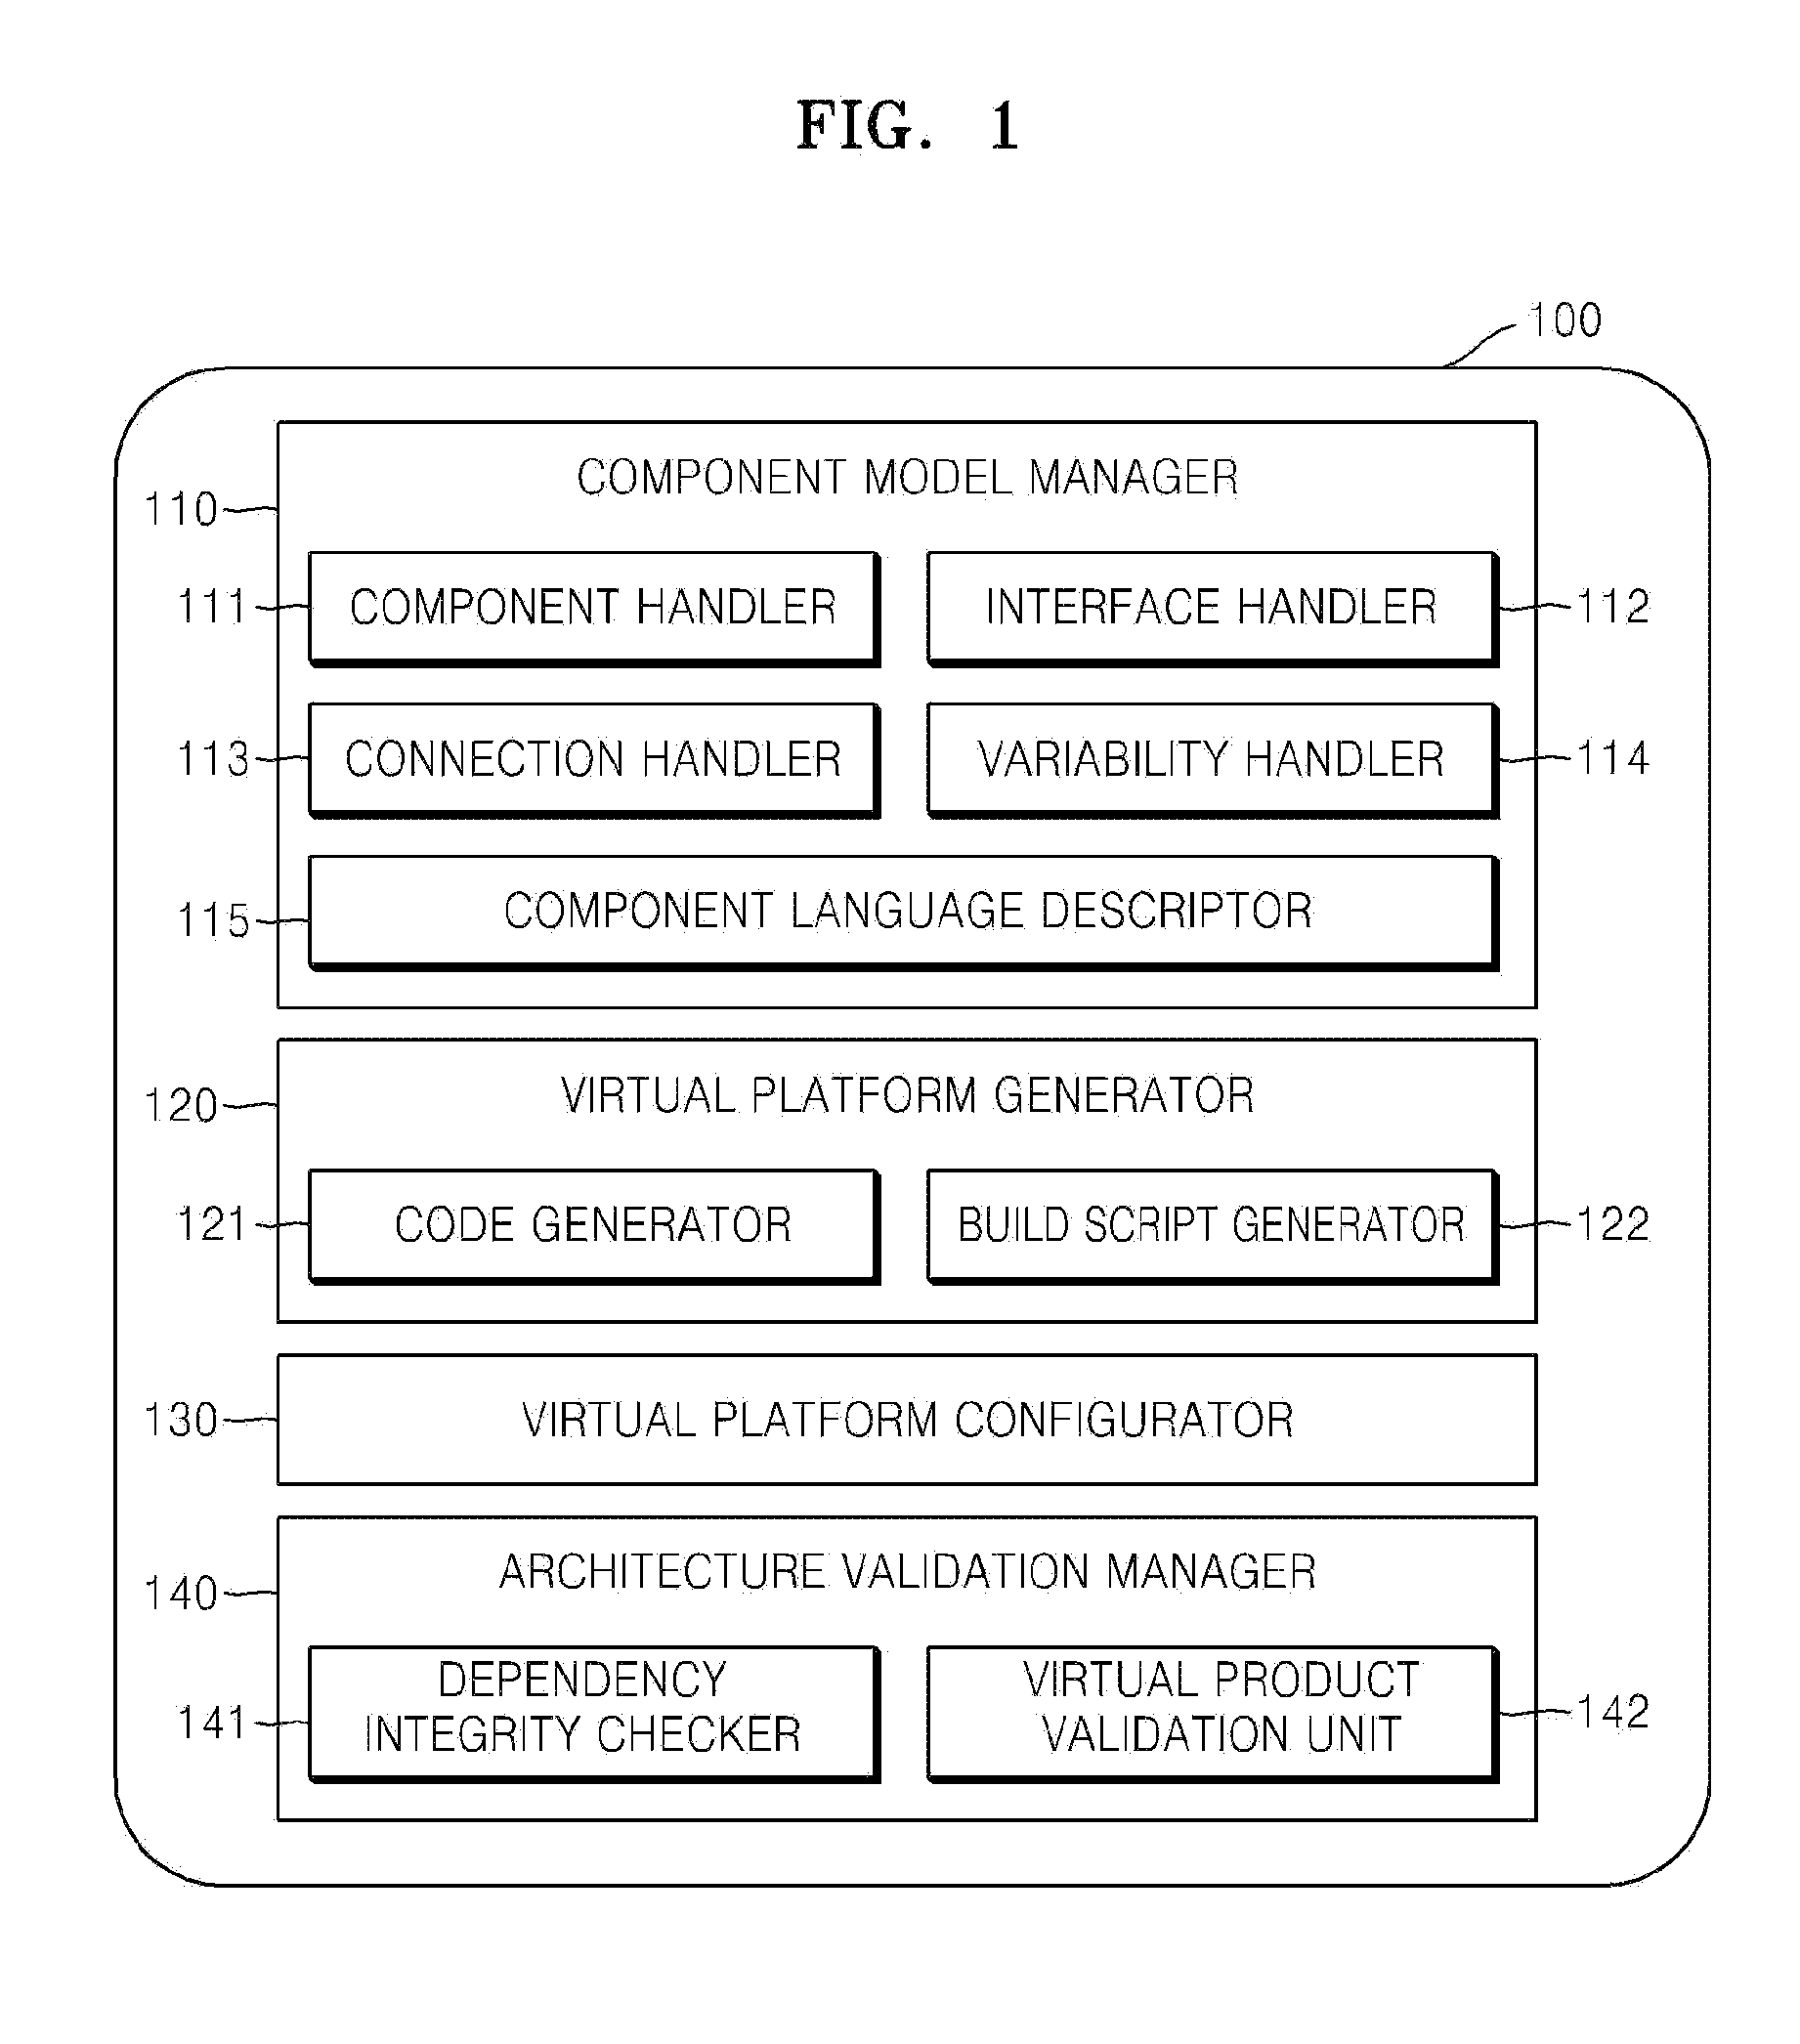 Method and apparatus for generating virtual software platform based on component model and validating software platform architecture using the platform